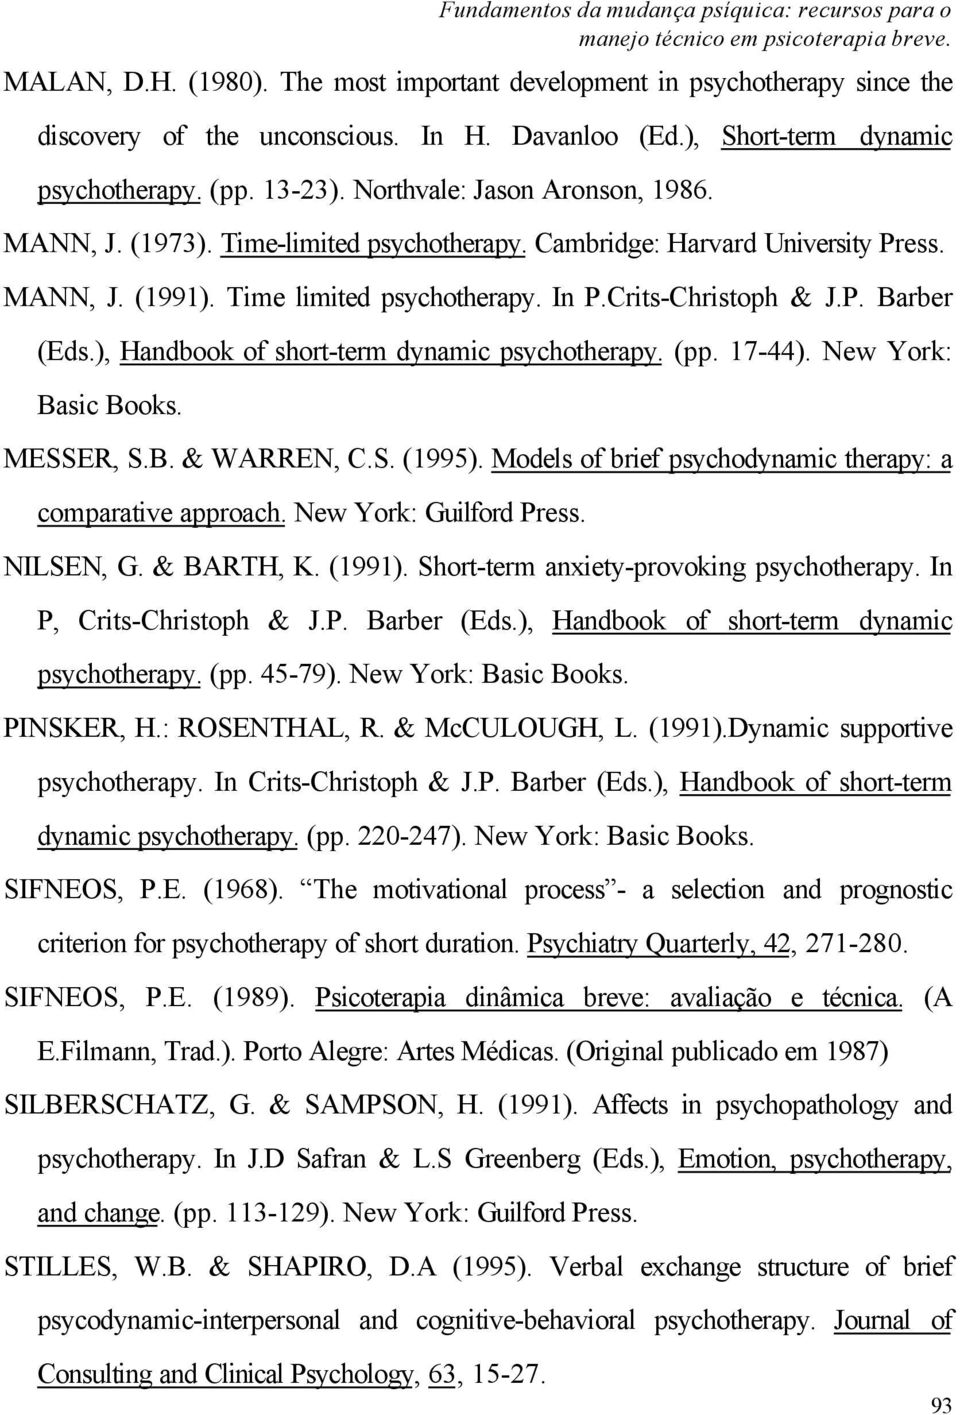 Time limited psychotherapy. In P.Crits-Christoph & J.P. Barber (Eds.), Handbook of short-term dynamic psychotherapy. (pp. 17-44). New York: Basic Books. MESSER, S.B. & WARREN, C.S. (1995).